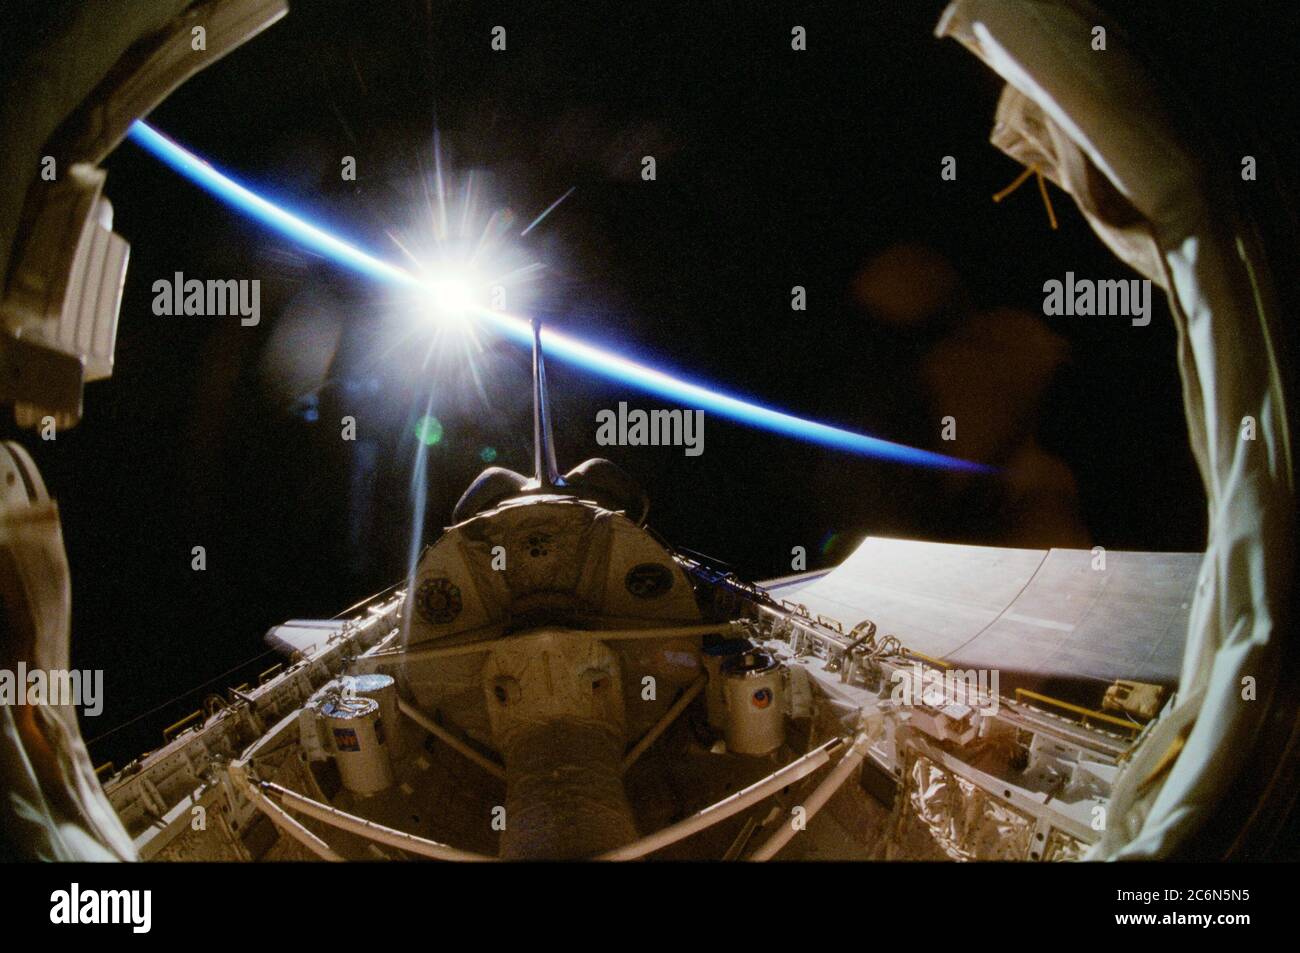 (17 April - 3 May 1998) --- A special lens on a 35mm camera gives a fish-eye effect to this &quot;nightside&quot; out-the-window view from the Space Shuttle Columbia's cabin.  The Spacelab Science Module, hosting 16-days of Neurolab research, is in frame center.  The tunnel that leads from the cabin to the science module in the cargo bay is at bottom center.  The sun can be seen bursting over Earth's horizon and the blue layer of airglow. Stock Photo